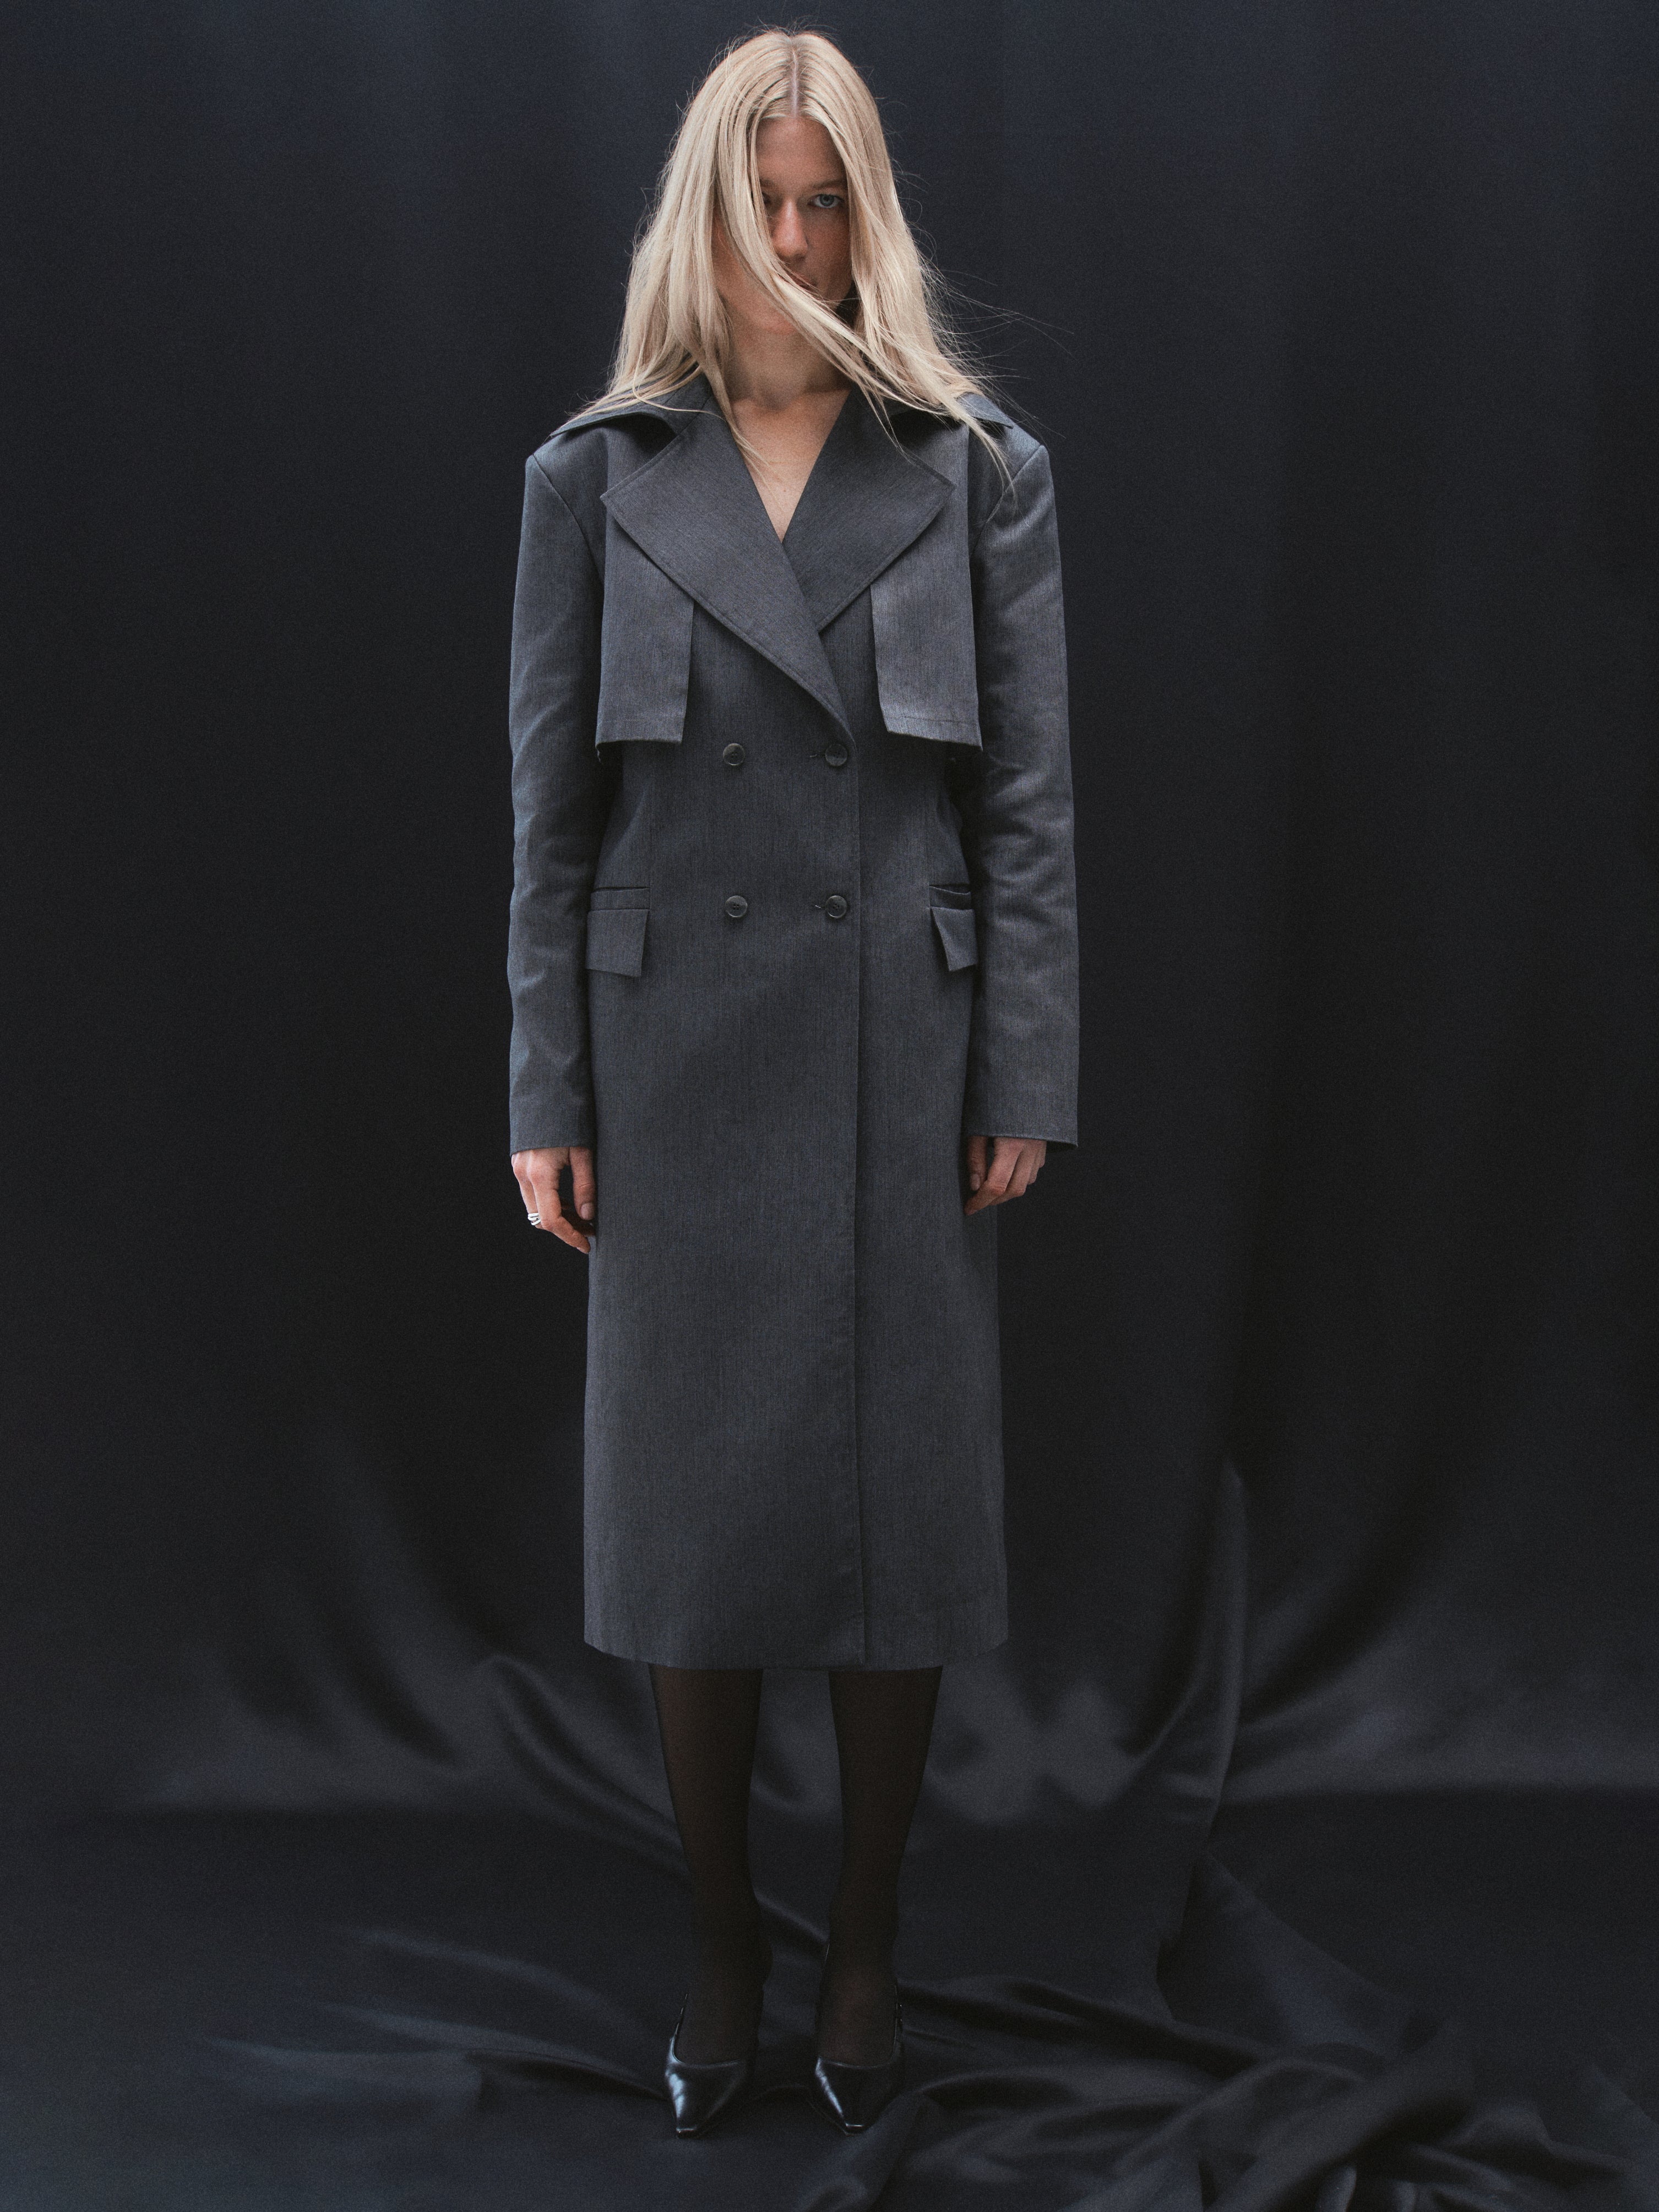 A model standing in a dark grey trench coat with four front buttons, created from recycled polyester and organic cotton blend